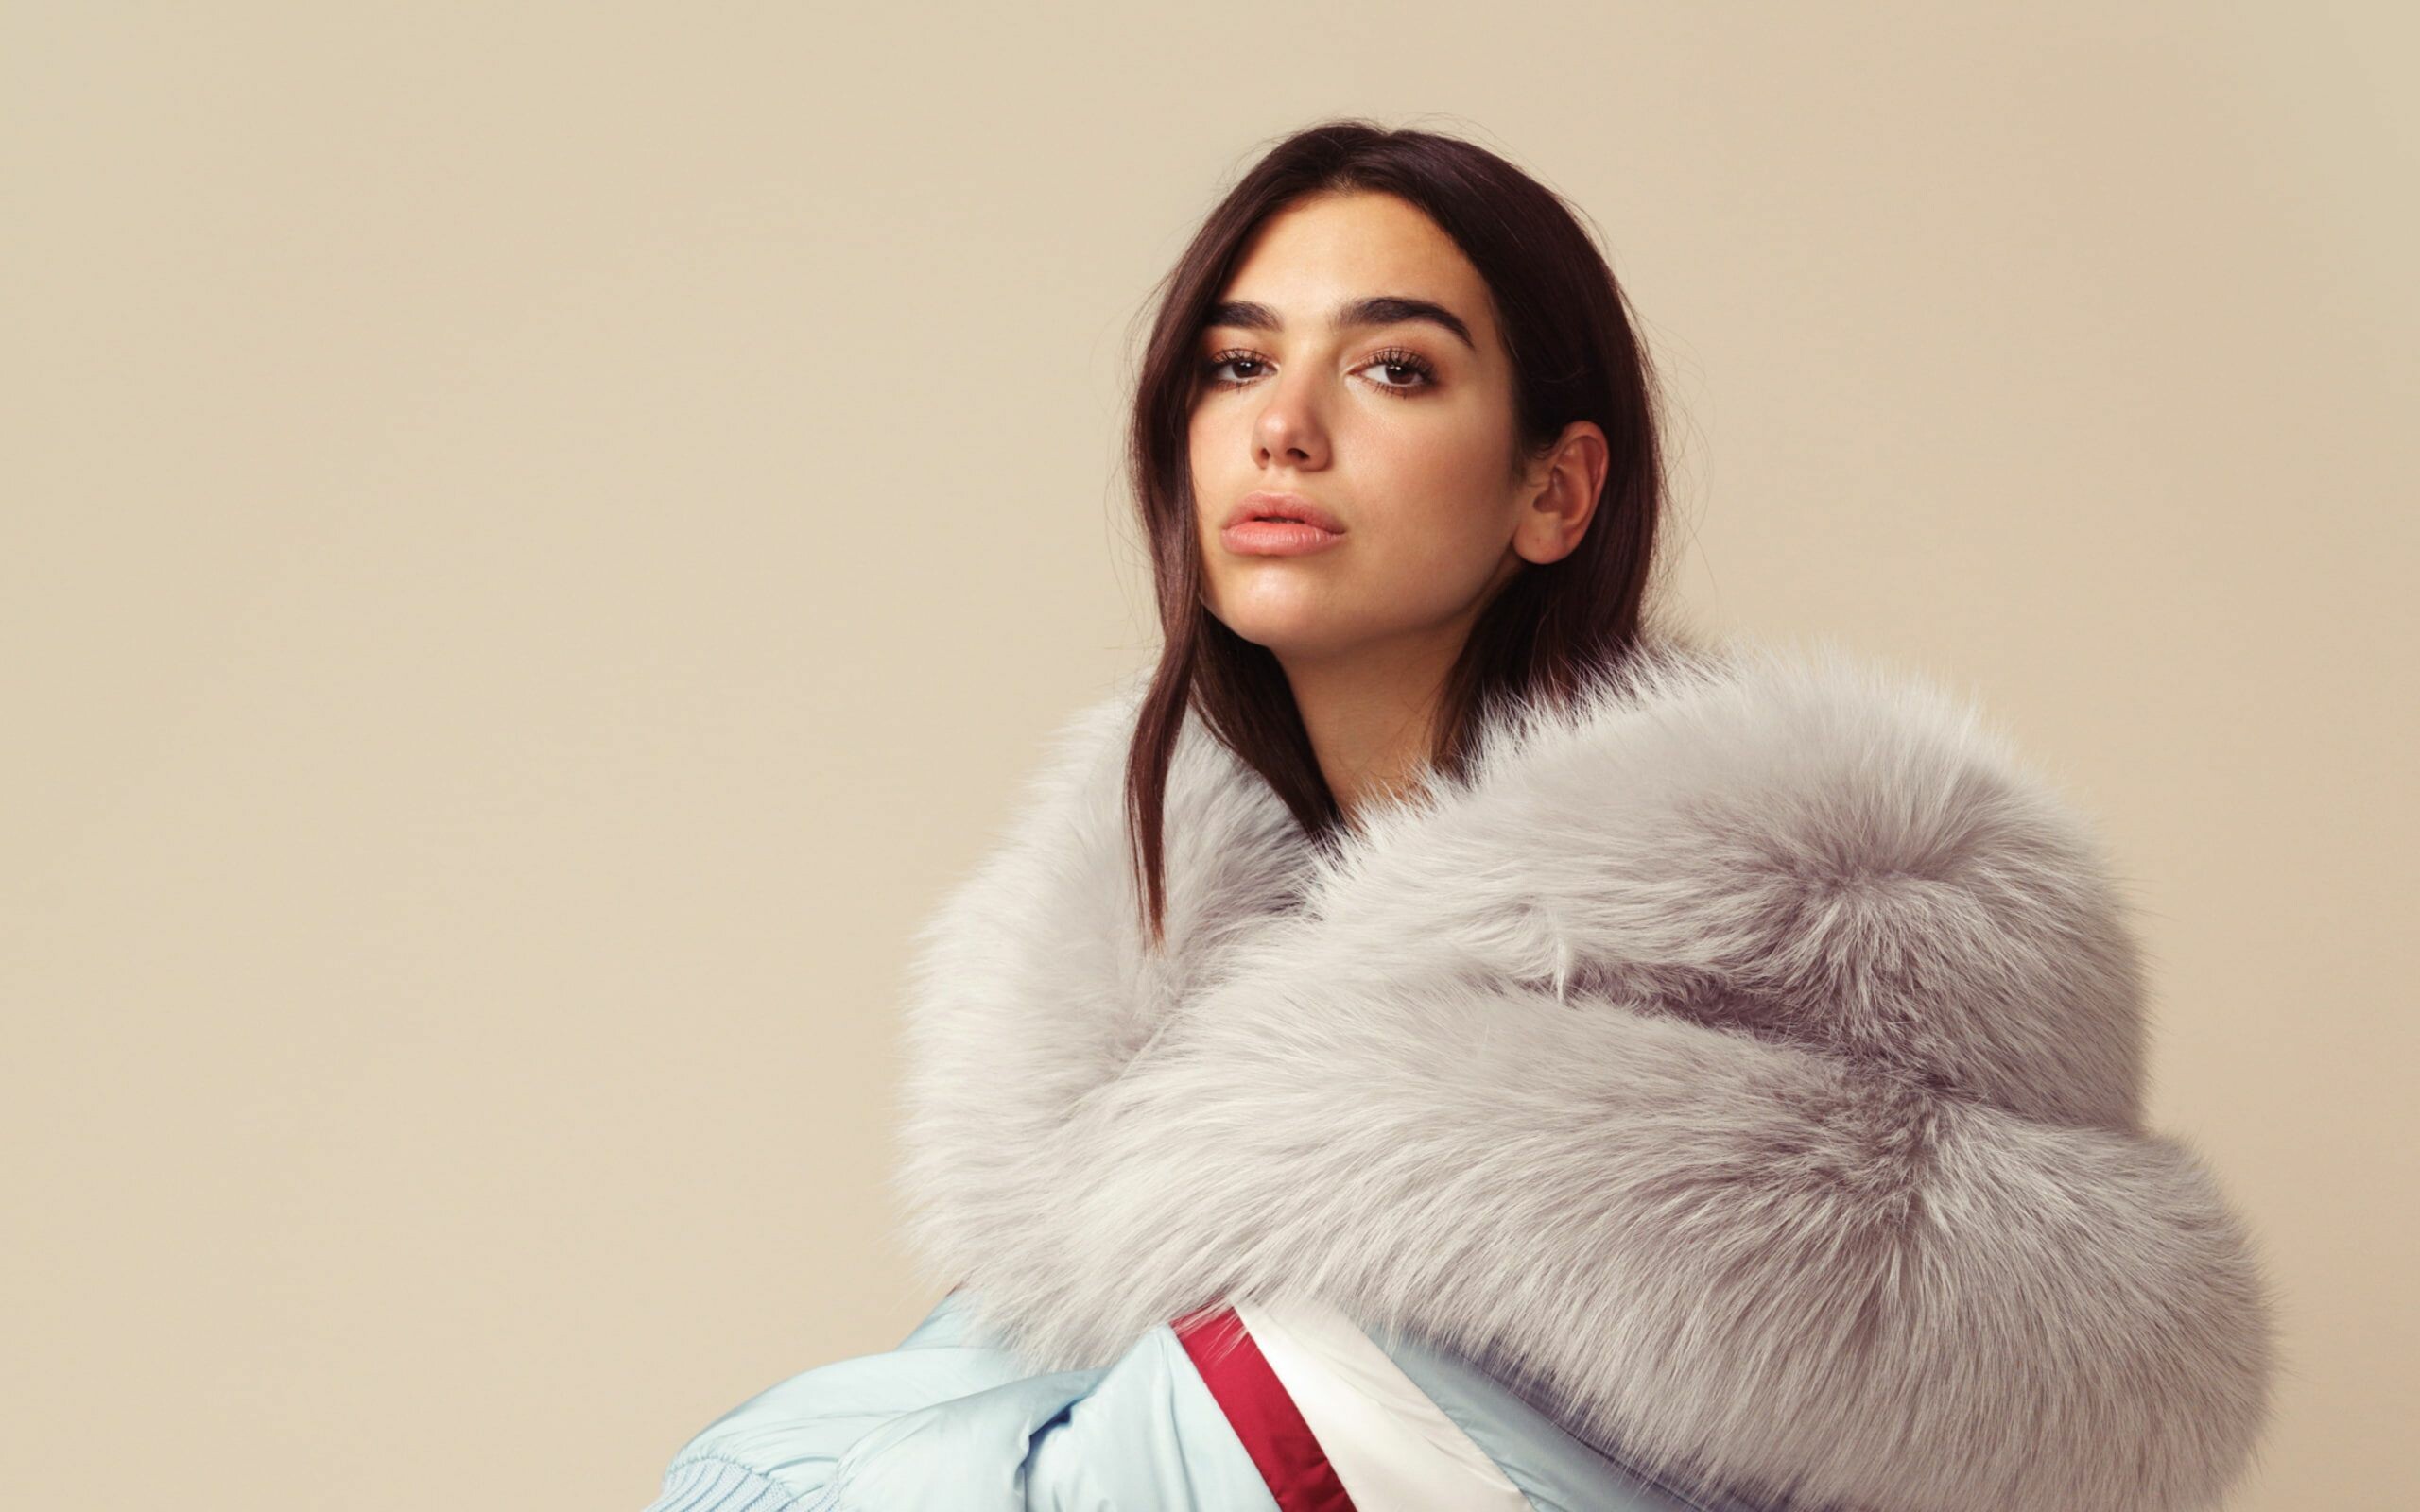 Dua Lipa: British singer, "Levitating", featuring DaBaby, was released on 1 October 2020. 2560x1600 HD Wallpaper.